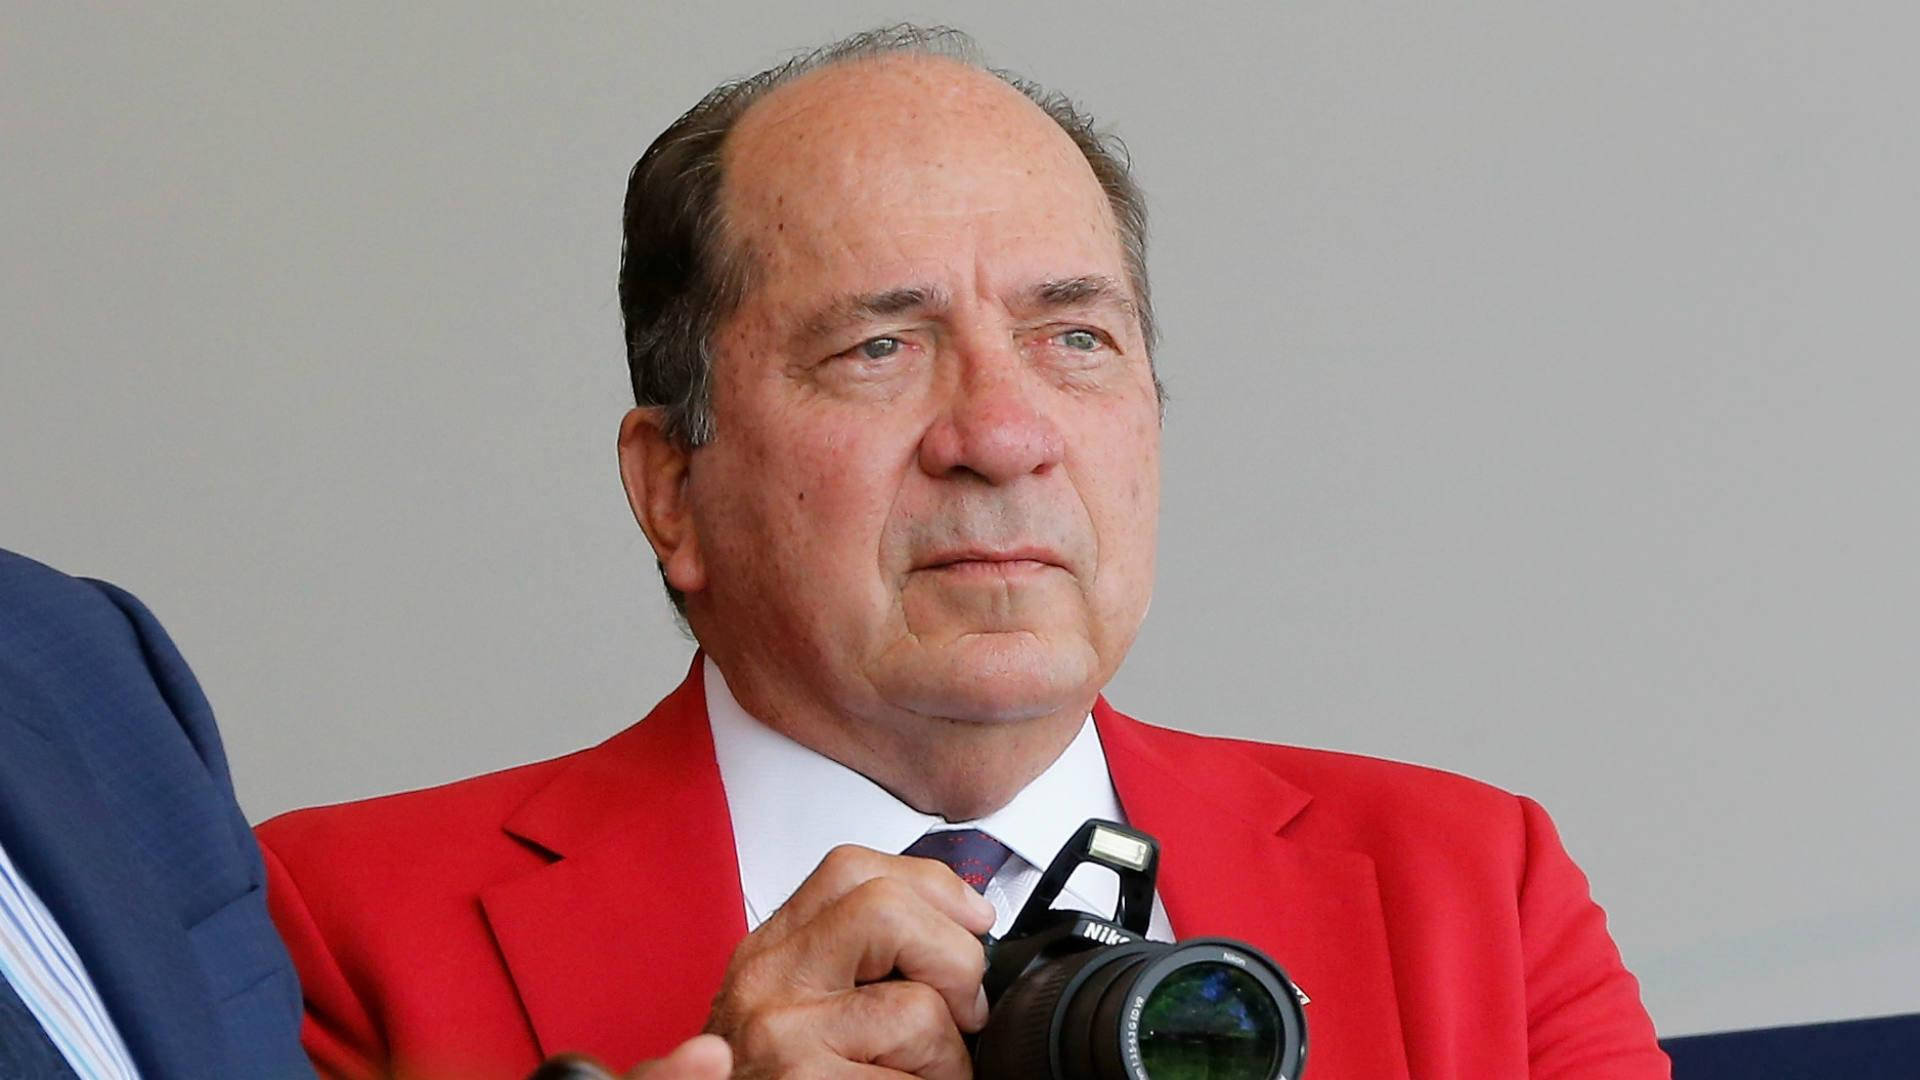 Johnny Bench With Camera